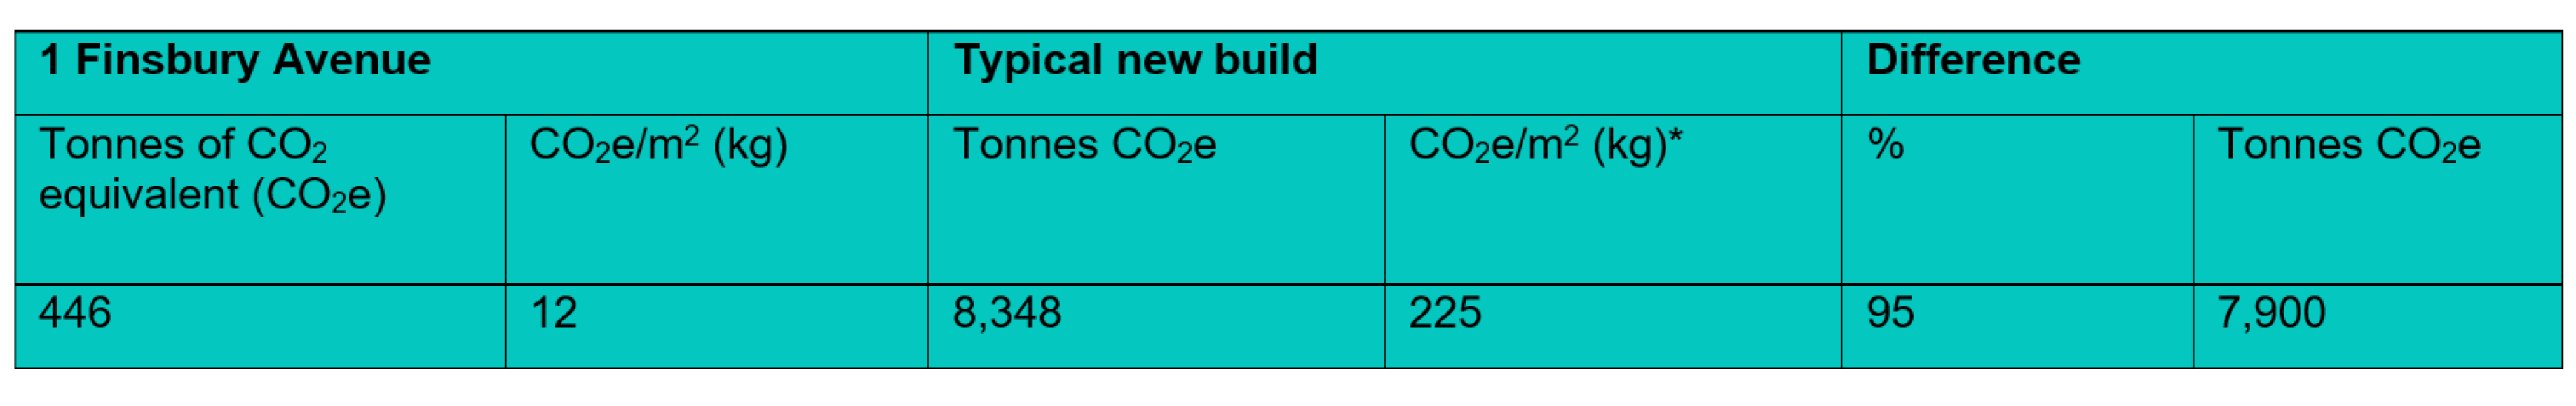 Embodied CO2 of structural frames